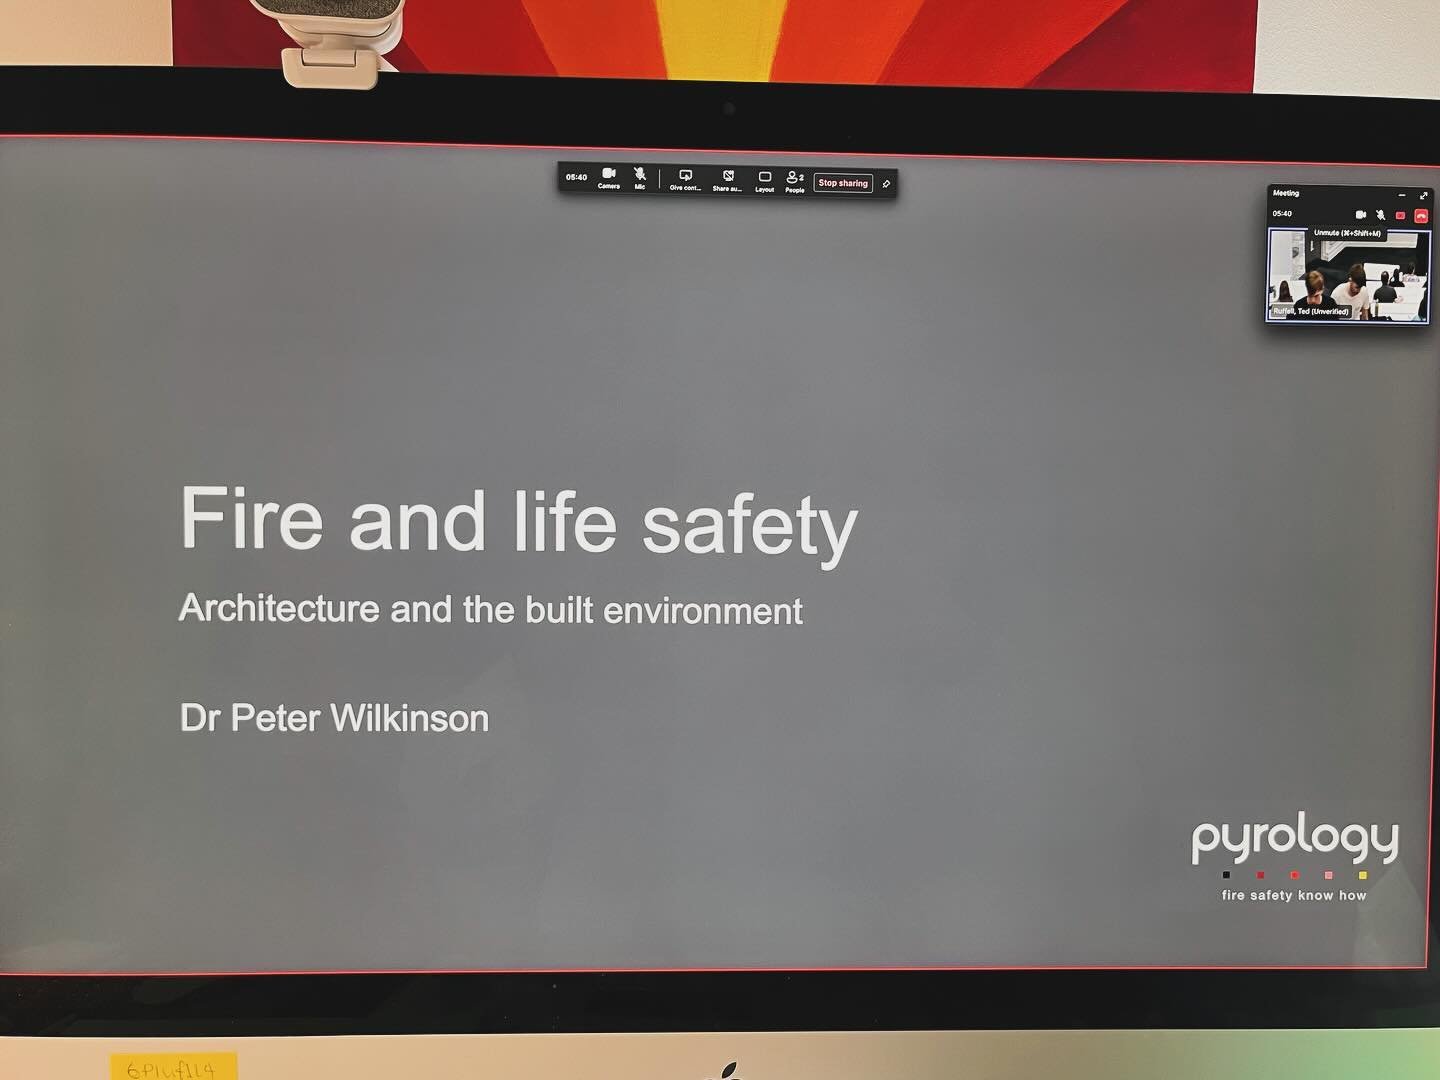 I enjoyed giving a lecture to undergraduate students at the Liverpool School of Architecture. Thank you for the opportunity to discuss fire and life safety in building design.